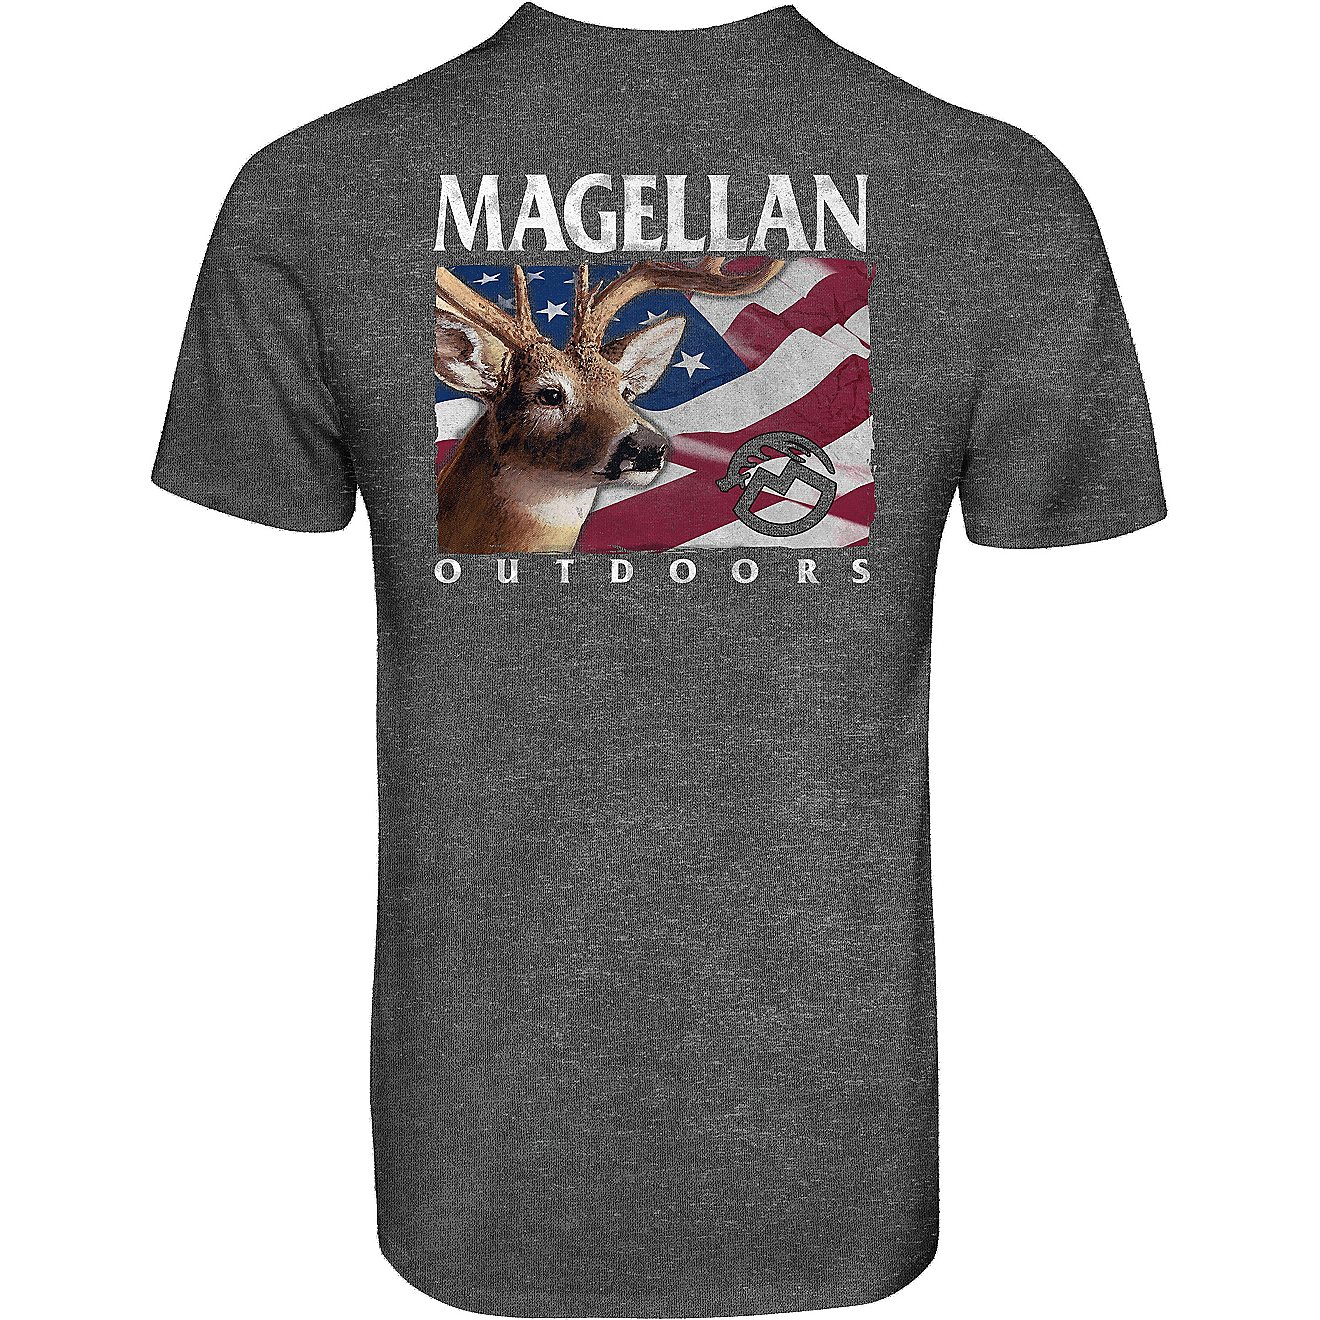 Magellan Outdoors Men’s Rack White and Blue Graphic T-shirt                                                                    - view number 1